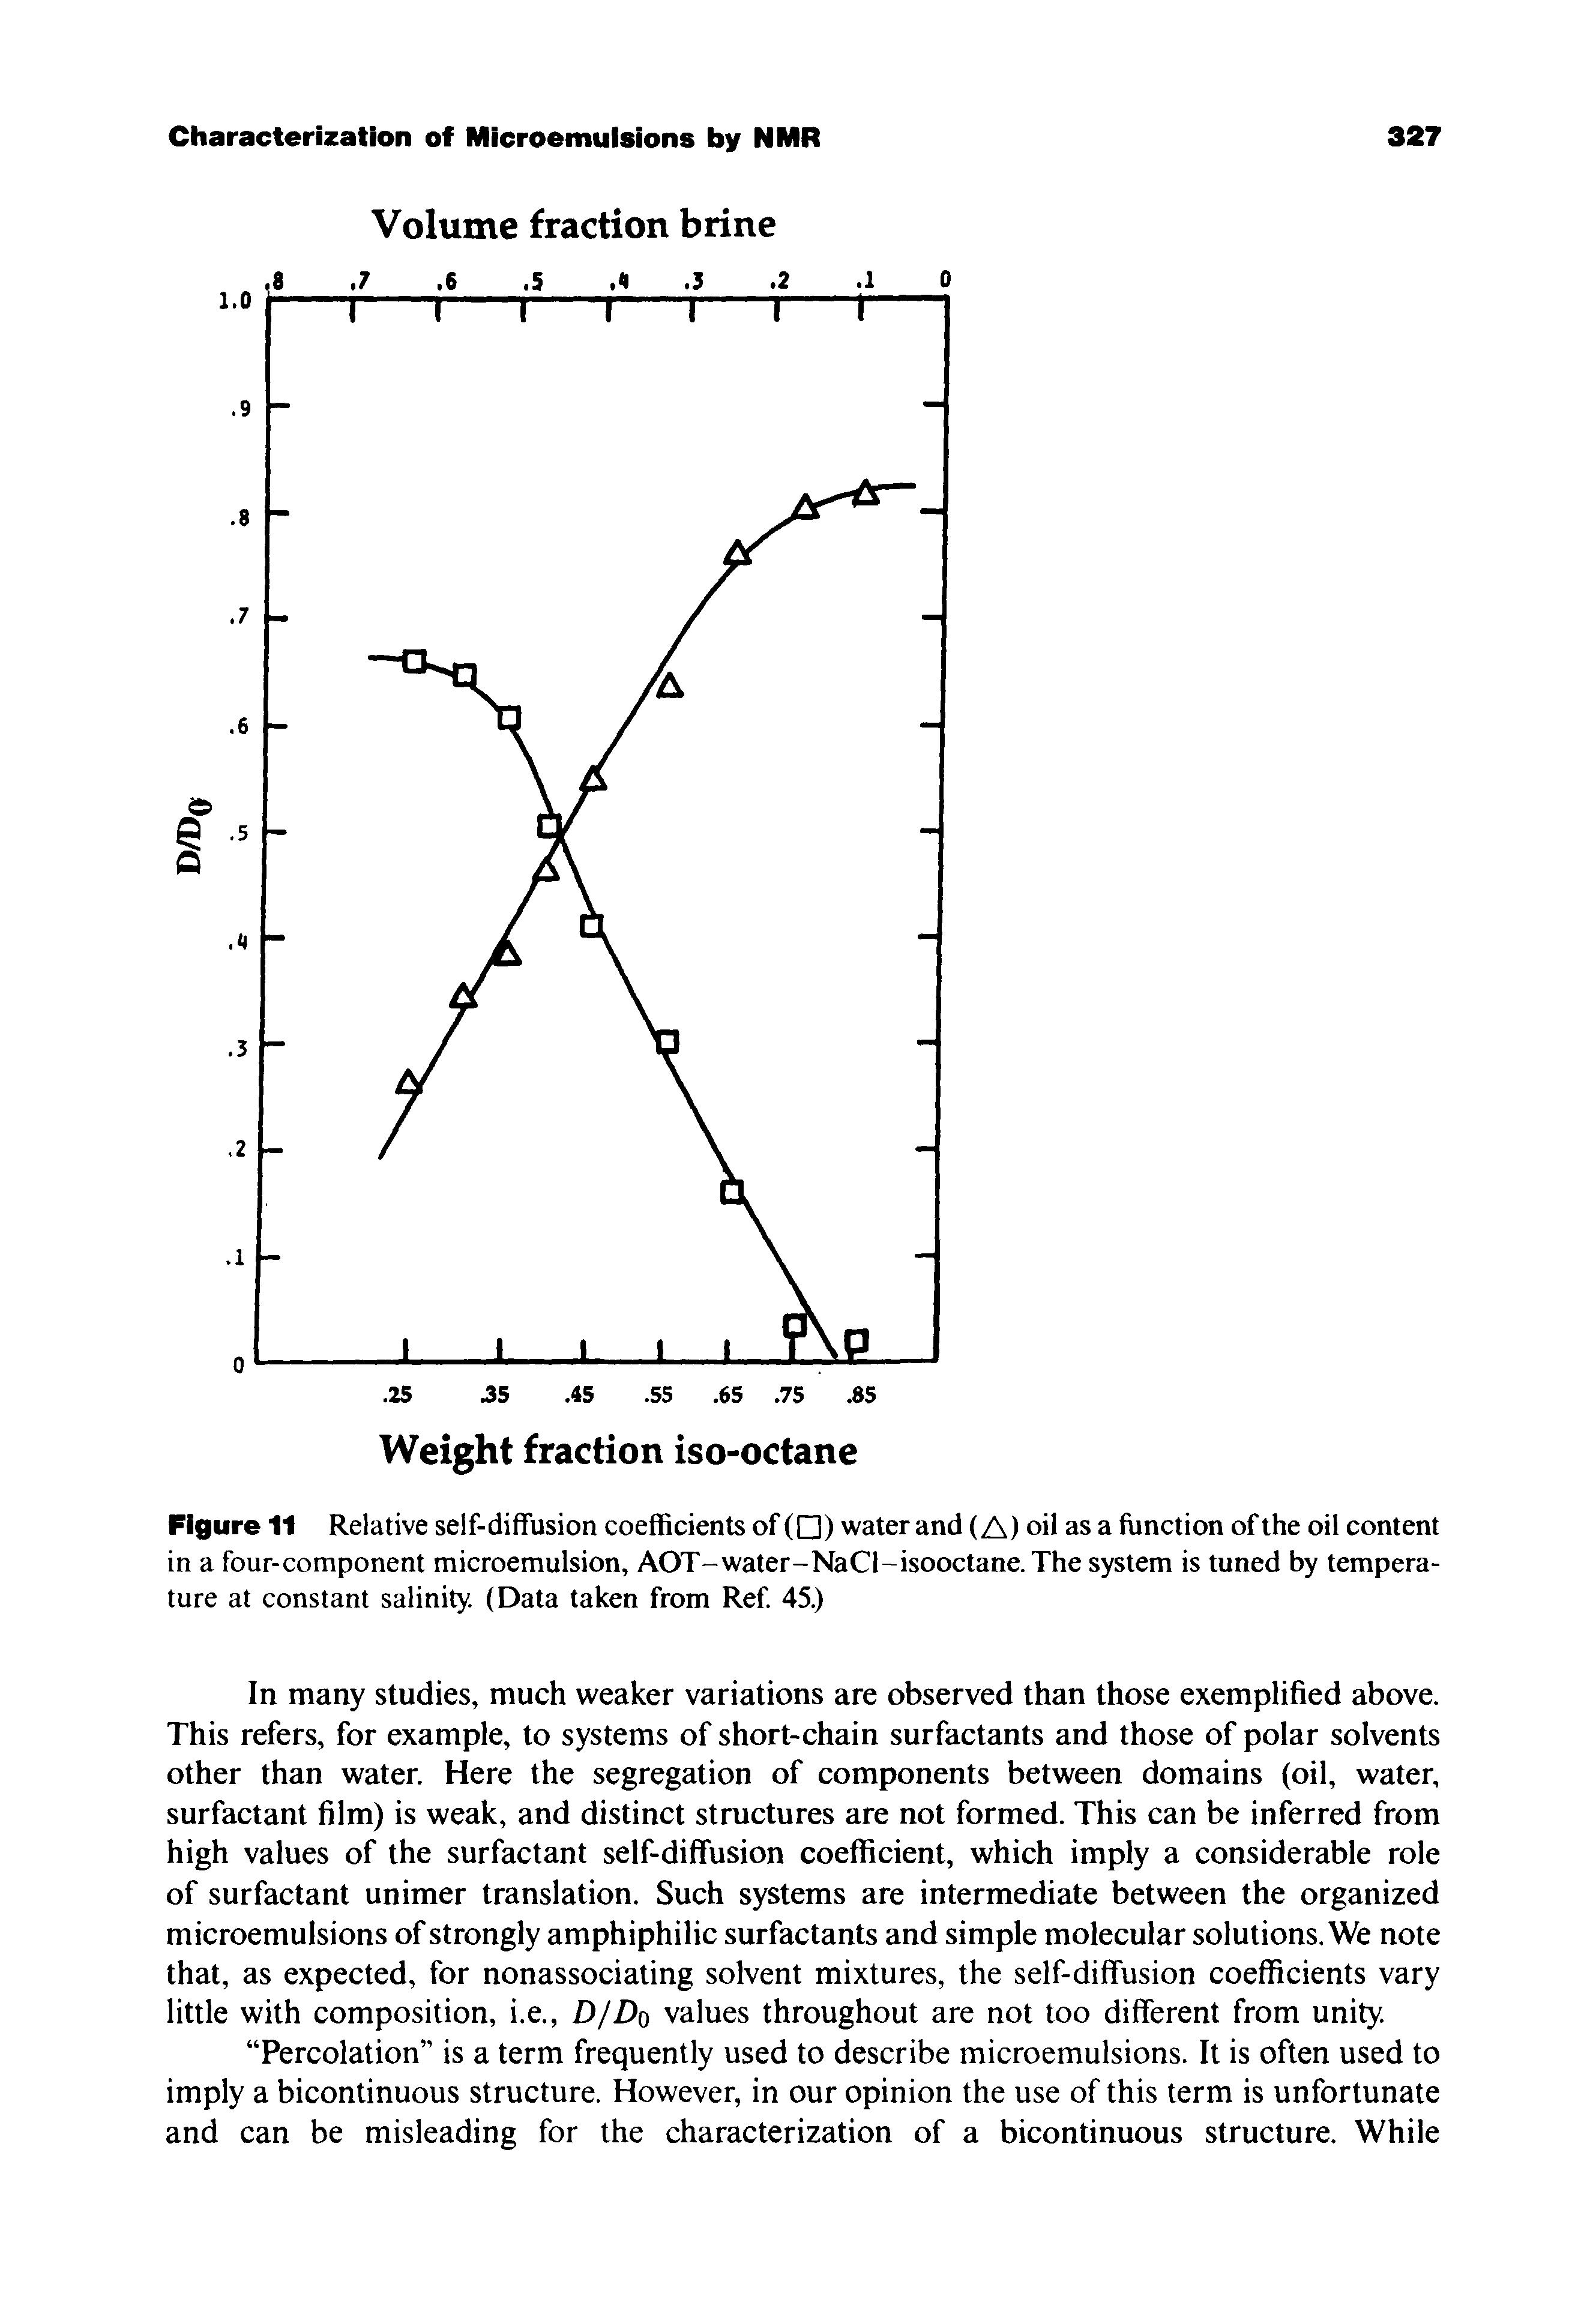 Figure 11 Relative self-diffusion coefficients of ( ) water and (A) oil as a function of the oil content in a four-component microemulsion, AOT-water-NaCl-isooctane.The system is tuned by temperature at constant salinity. (Data taken from Ref. 45.)...